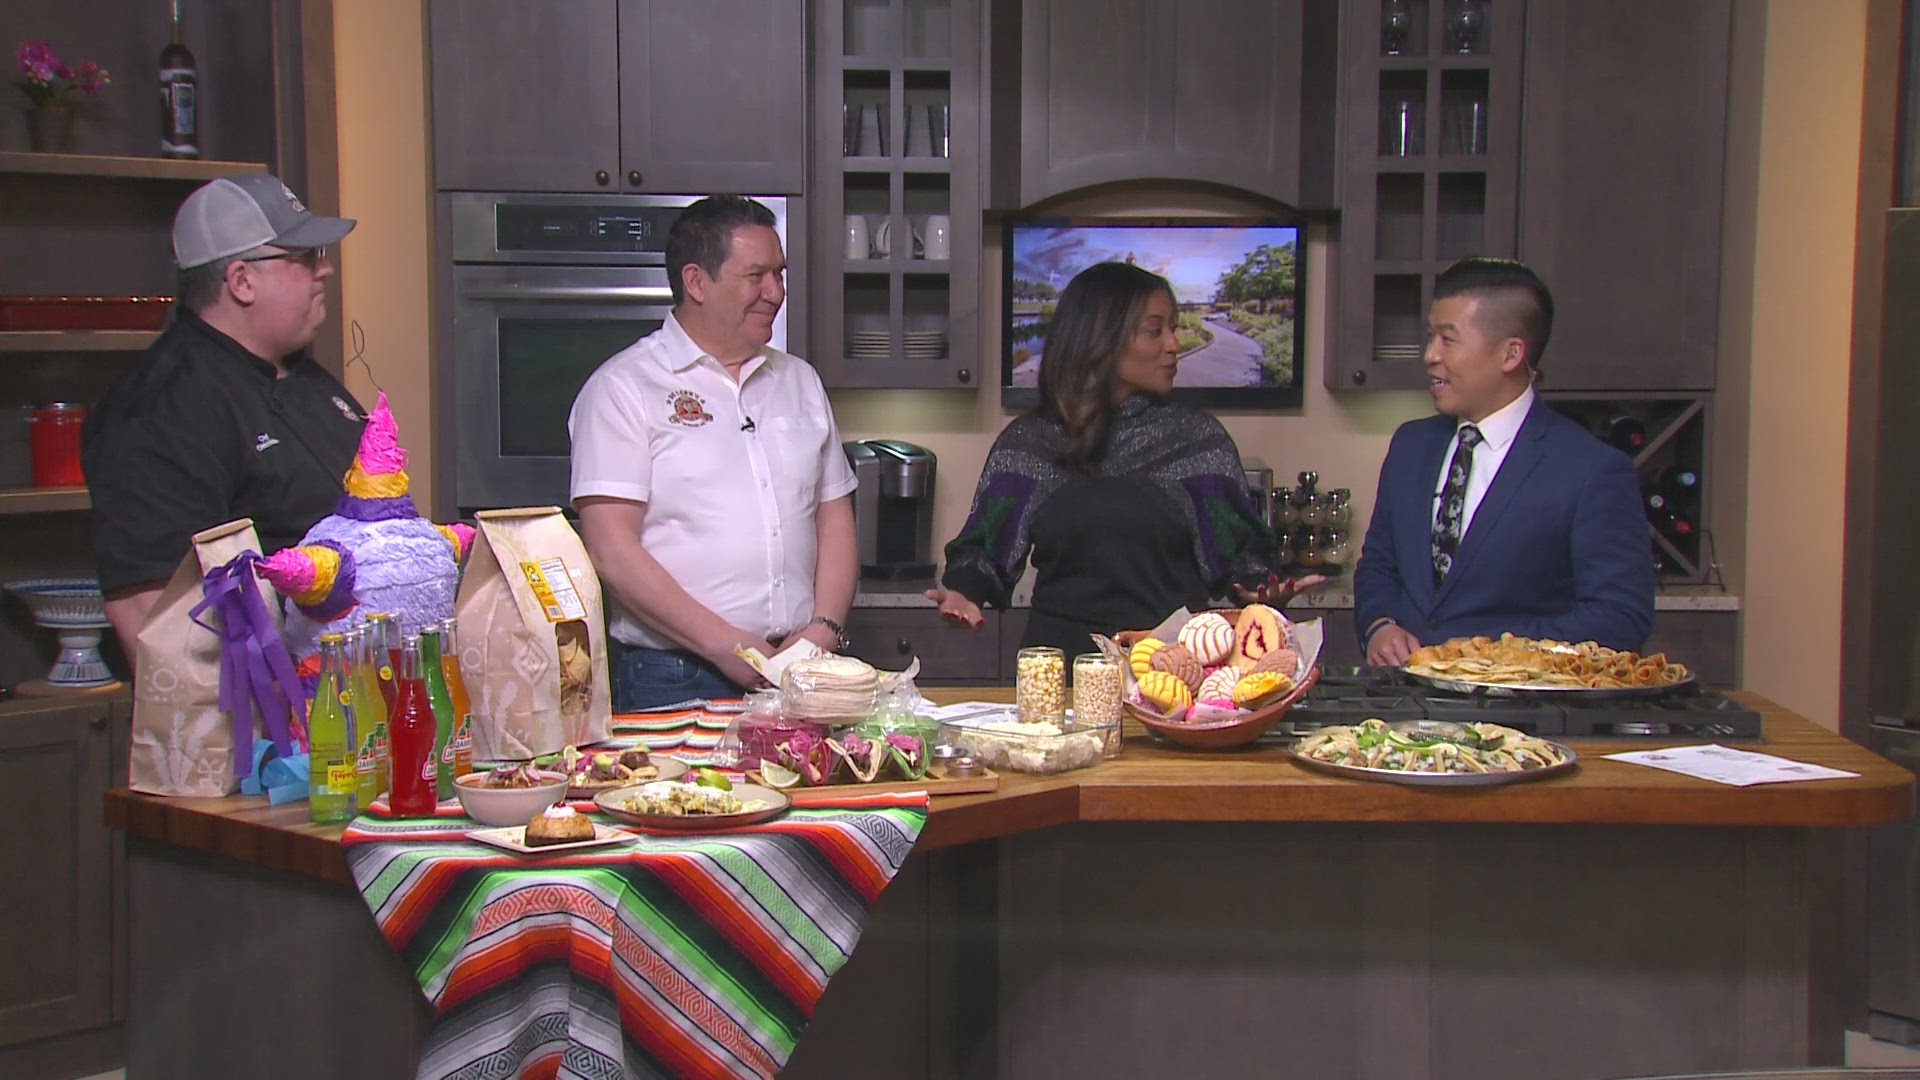 Sergio from De Leon’s joined the show to sample some of the tasty food they are offering for $25 during restaurant week.